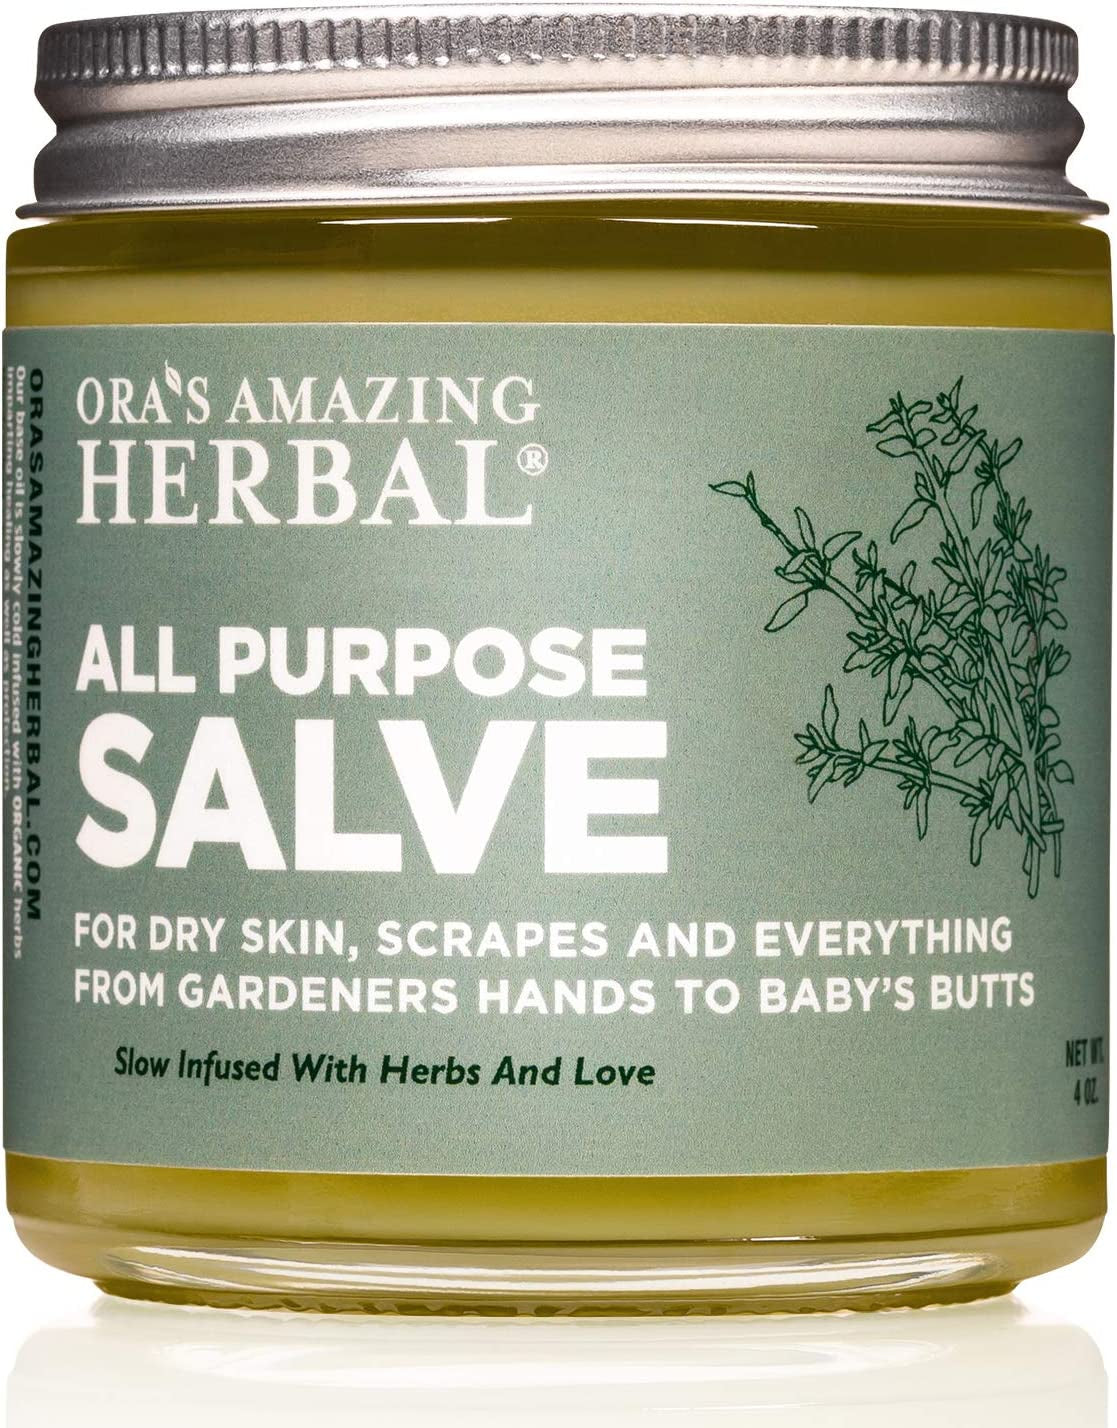 All Purpose Salve, Herbal Healing Skin Balm with Tea Tree, Comfrey Calendula Plantain Thyme Beeswax, Soothing Itch Relief, 4 Oz